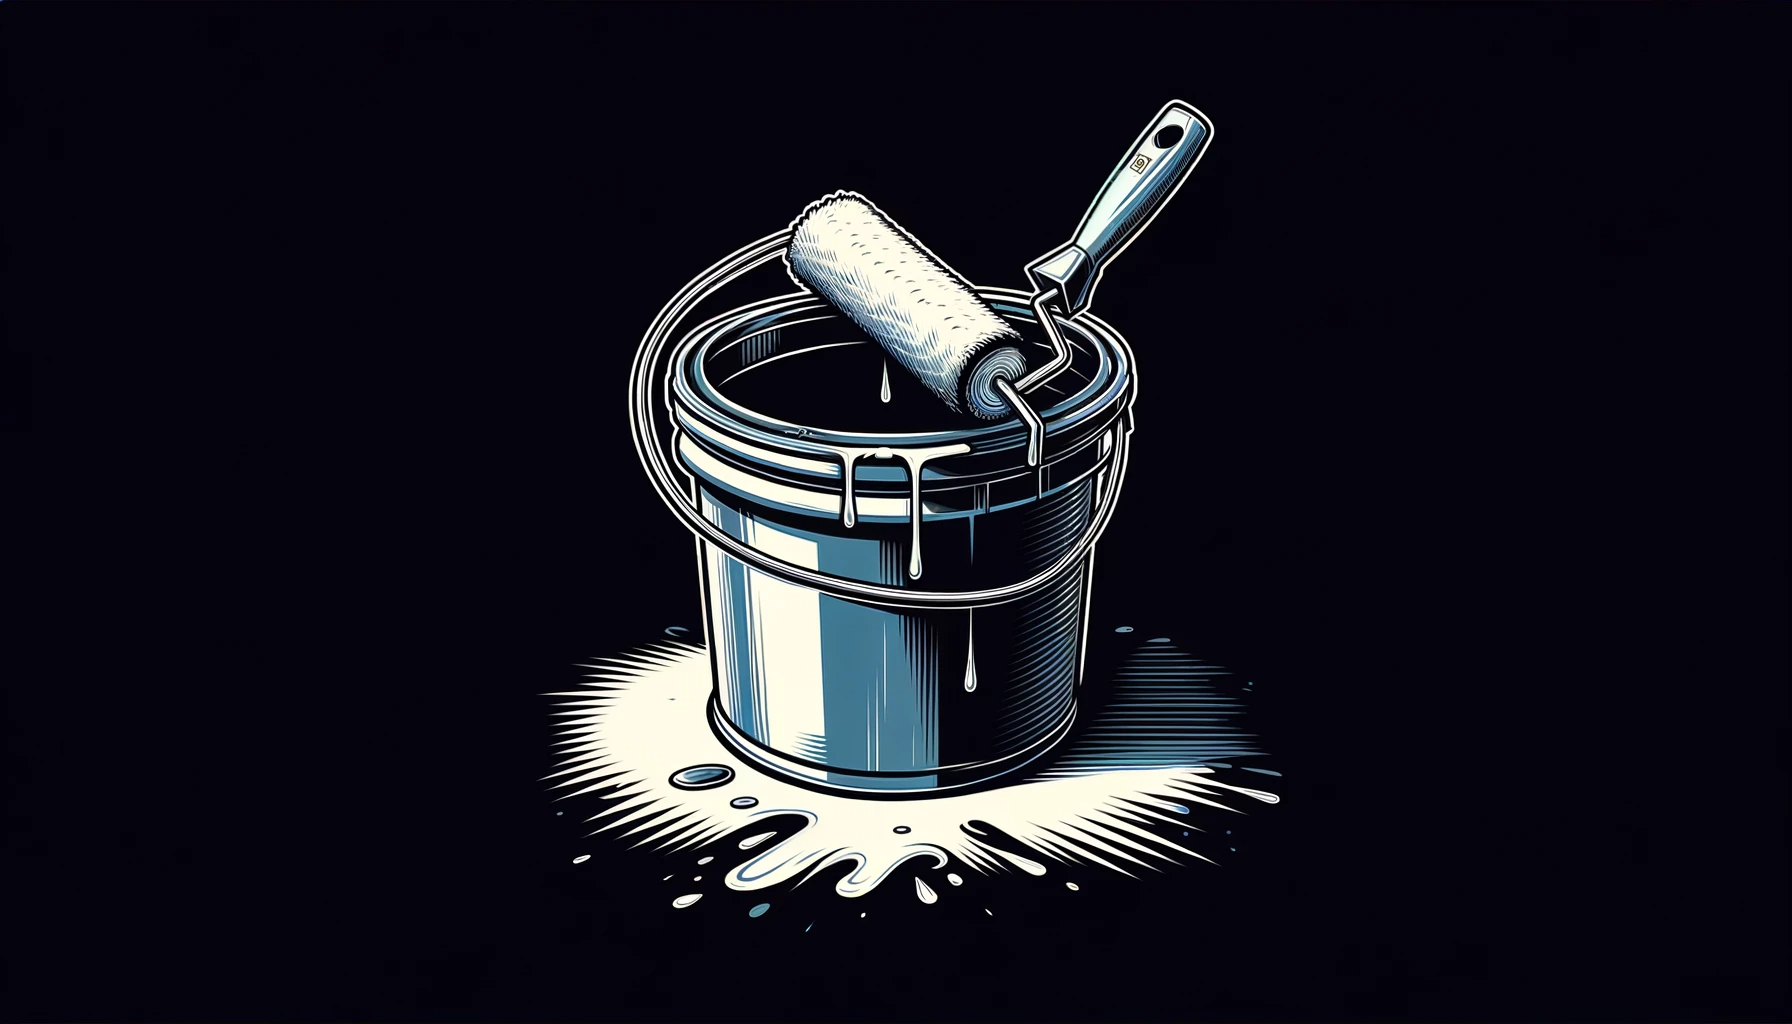 DALL·E 2023 11 19 05.05.16 A wide format illustration of a paint bucket for home use set against a black background. The paint bucket should appear sturdy and functional possi